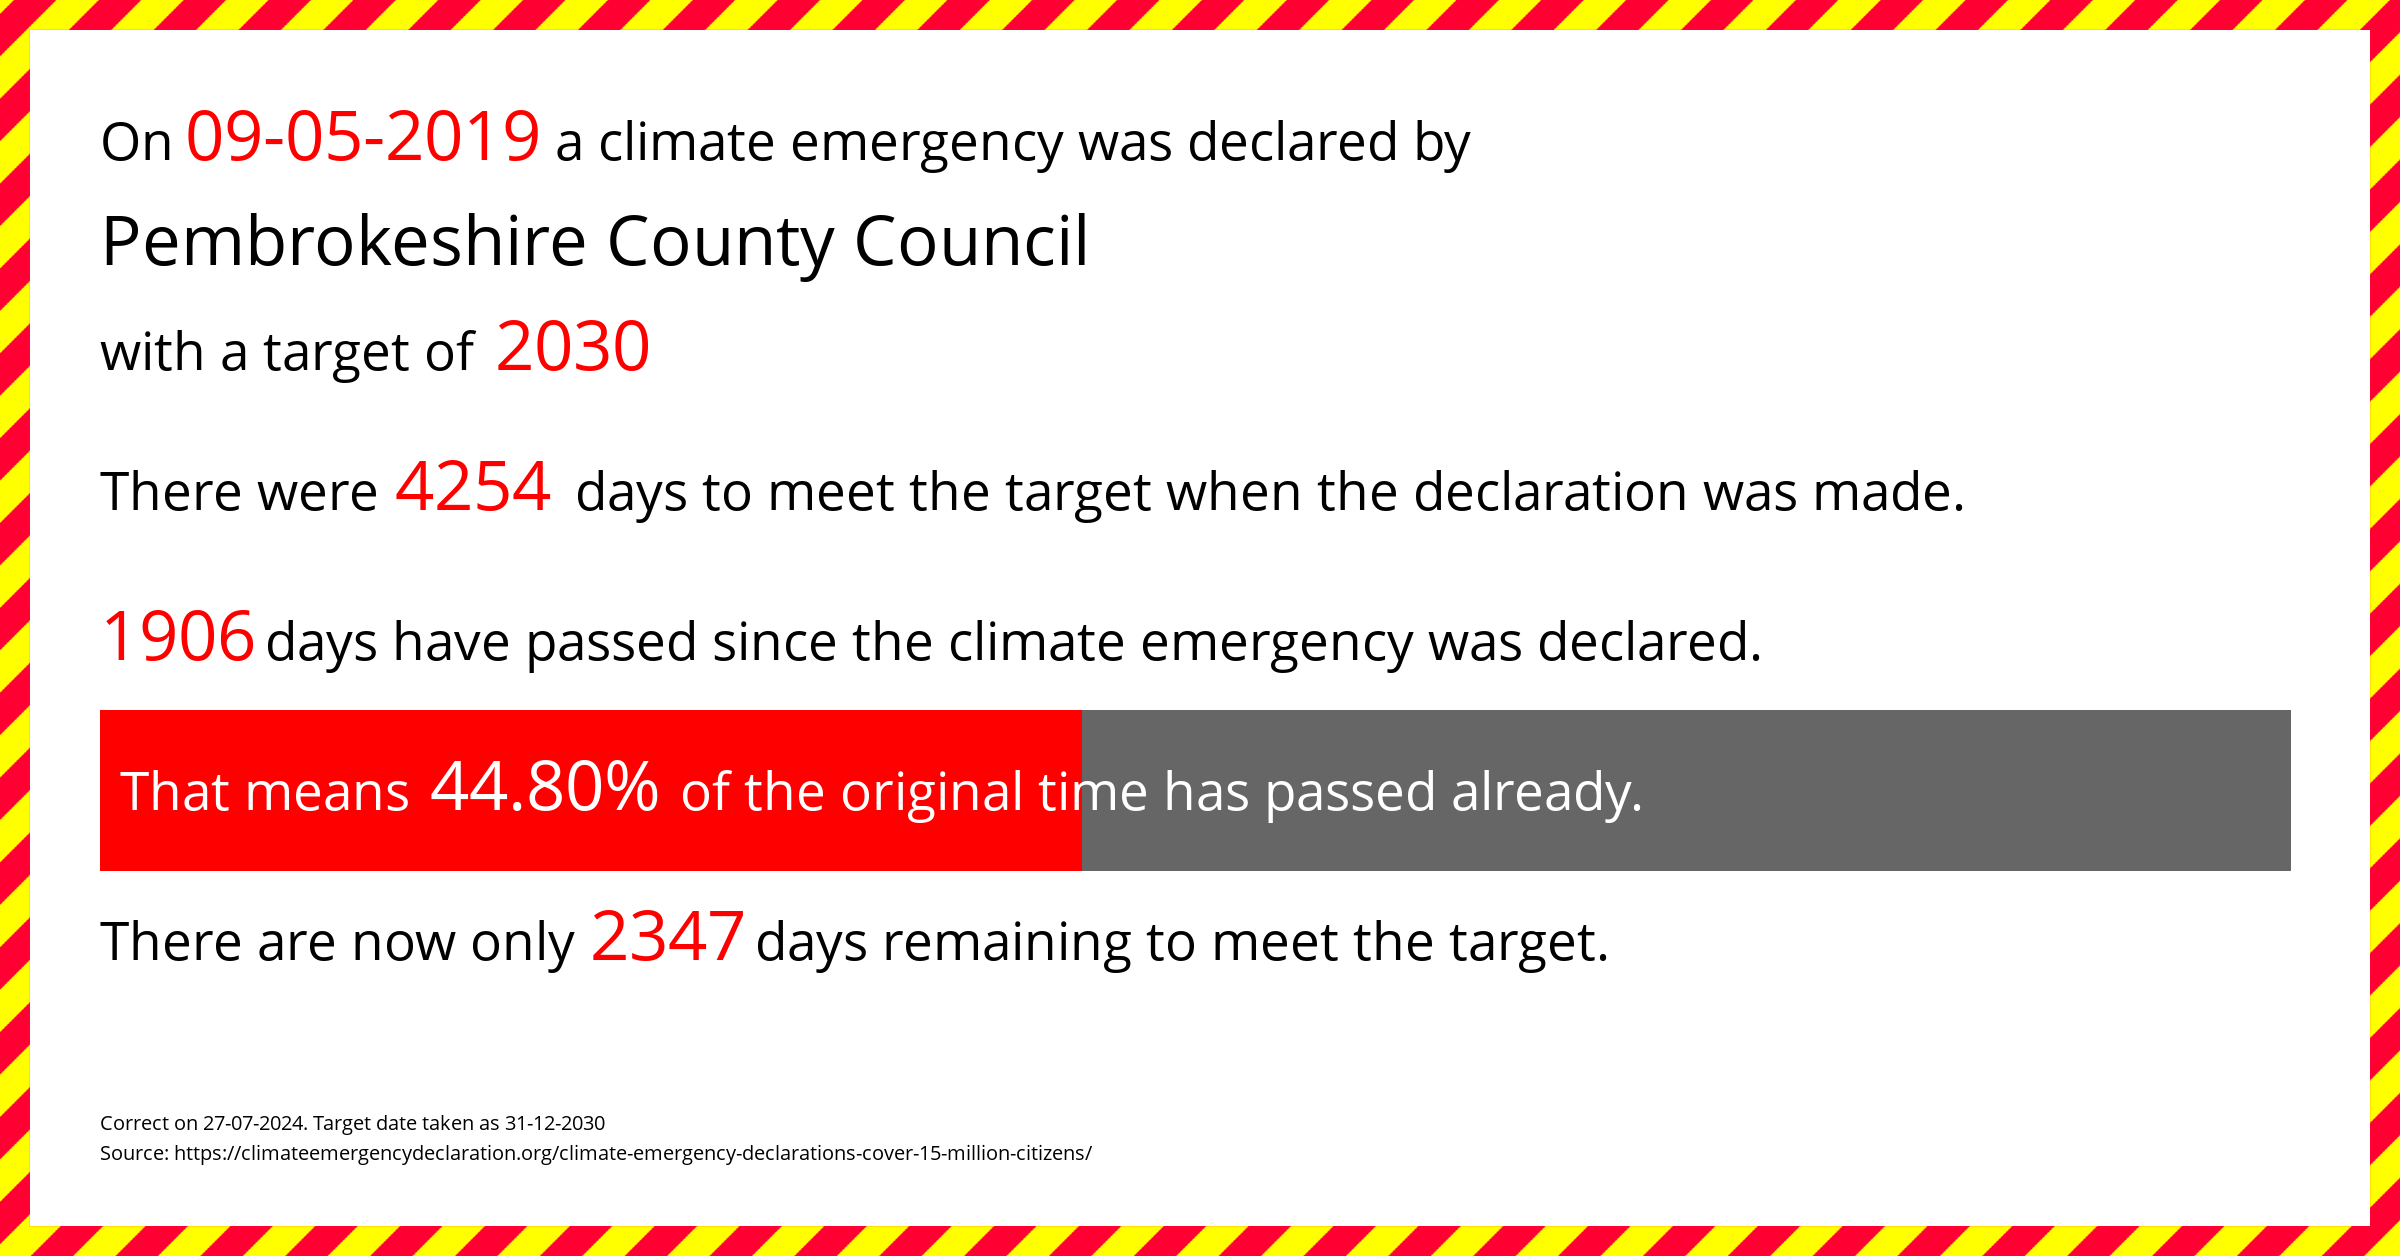 Pembrokeshire County Council declared a Climate emergency on Thursday 9th May 2019, with a target of 2030.